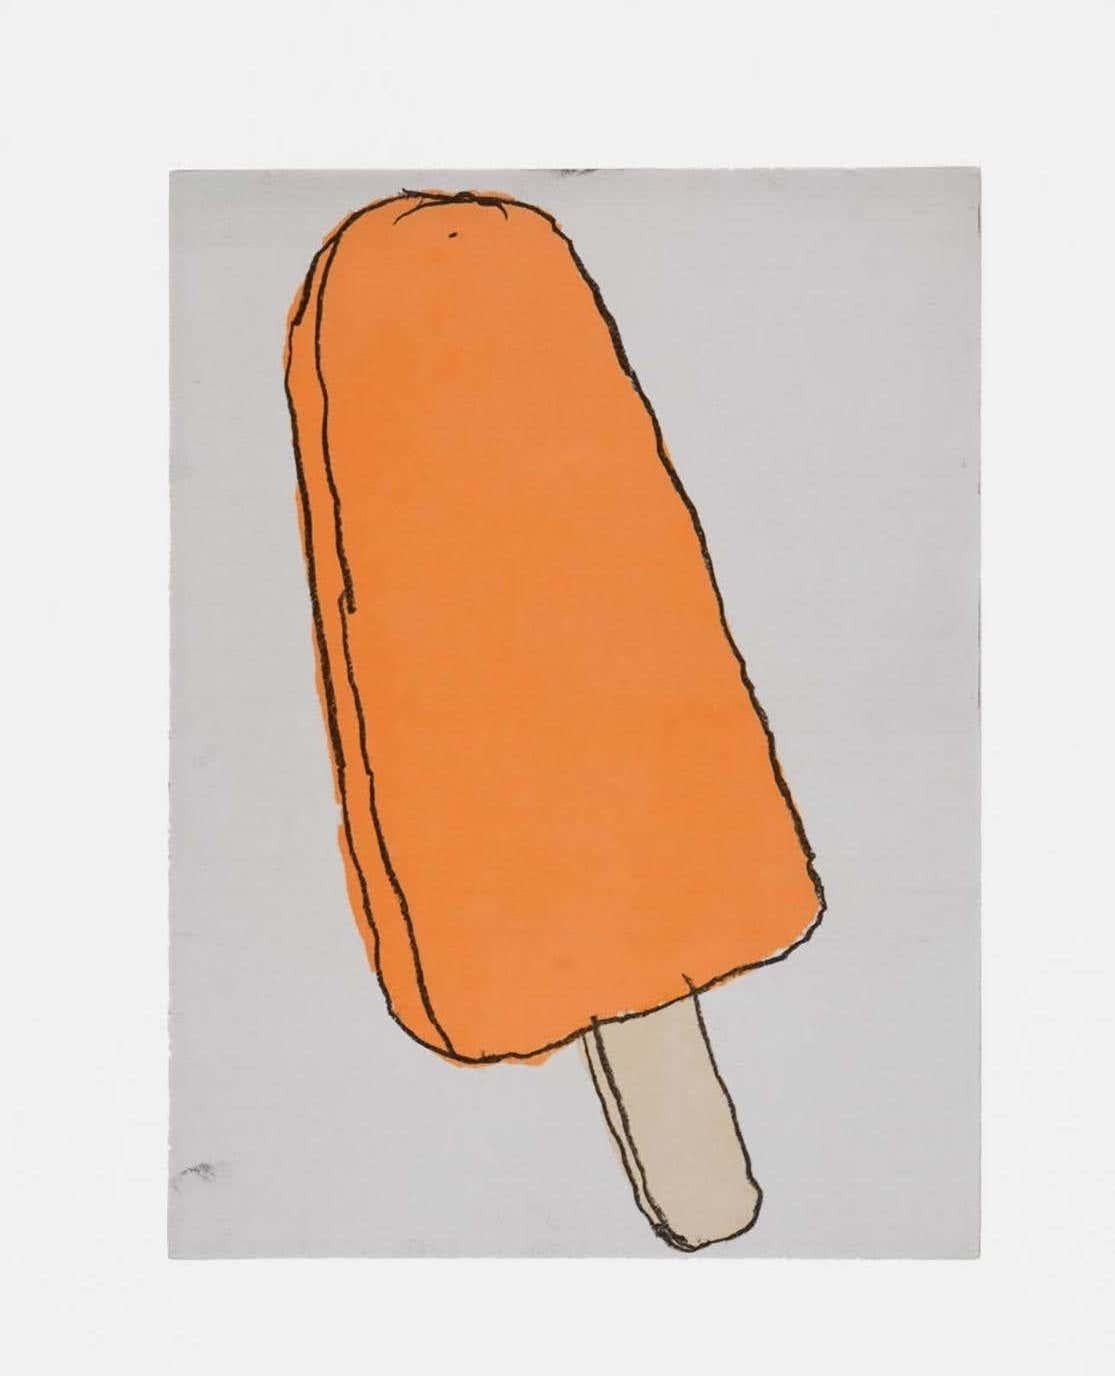 Donald Baechler, Creamsicle, 1999:
A fun, whimsical, and highly decorative signed limited edition Baechler piece that works well in any setting.  

Medium: Soft-ground etching and aquatint on Magnani Pescia paper.
Sheet size: 22 x 17 inches
Hand